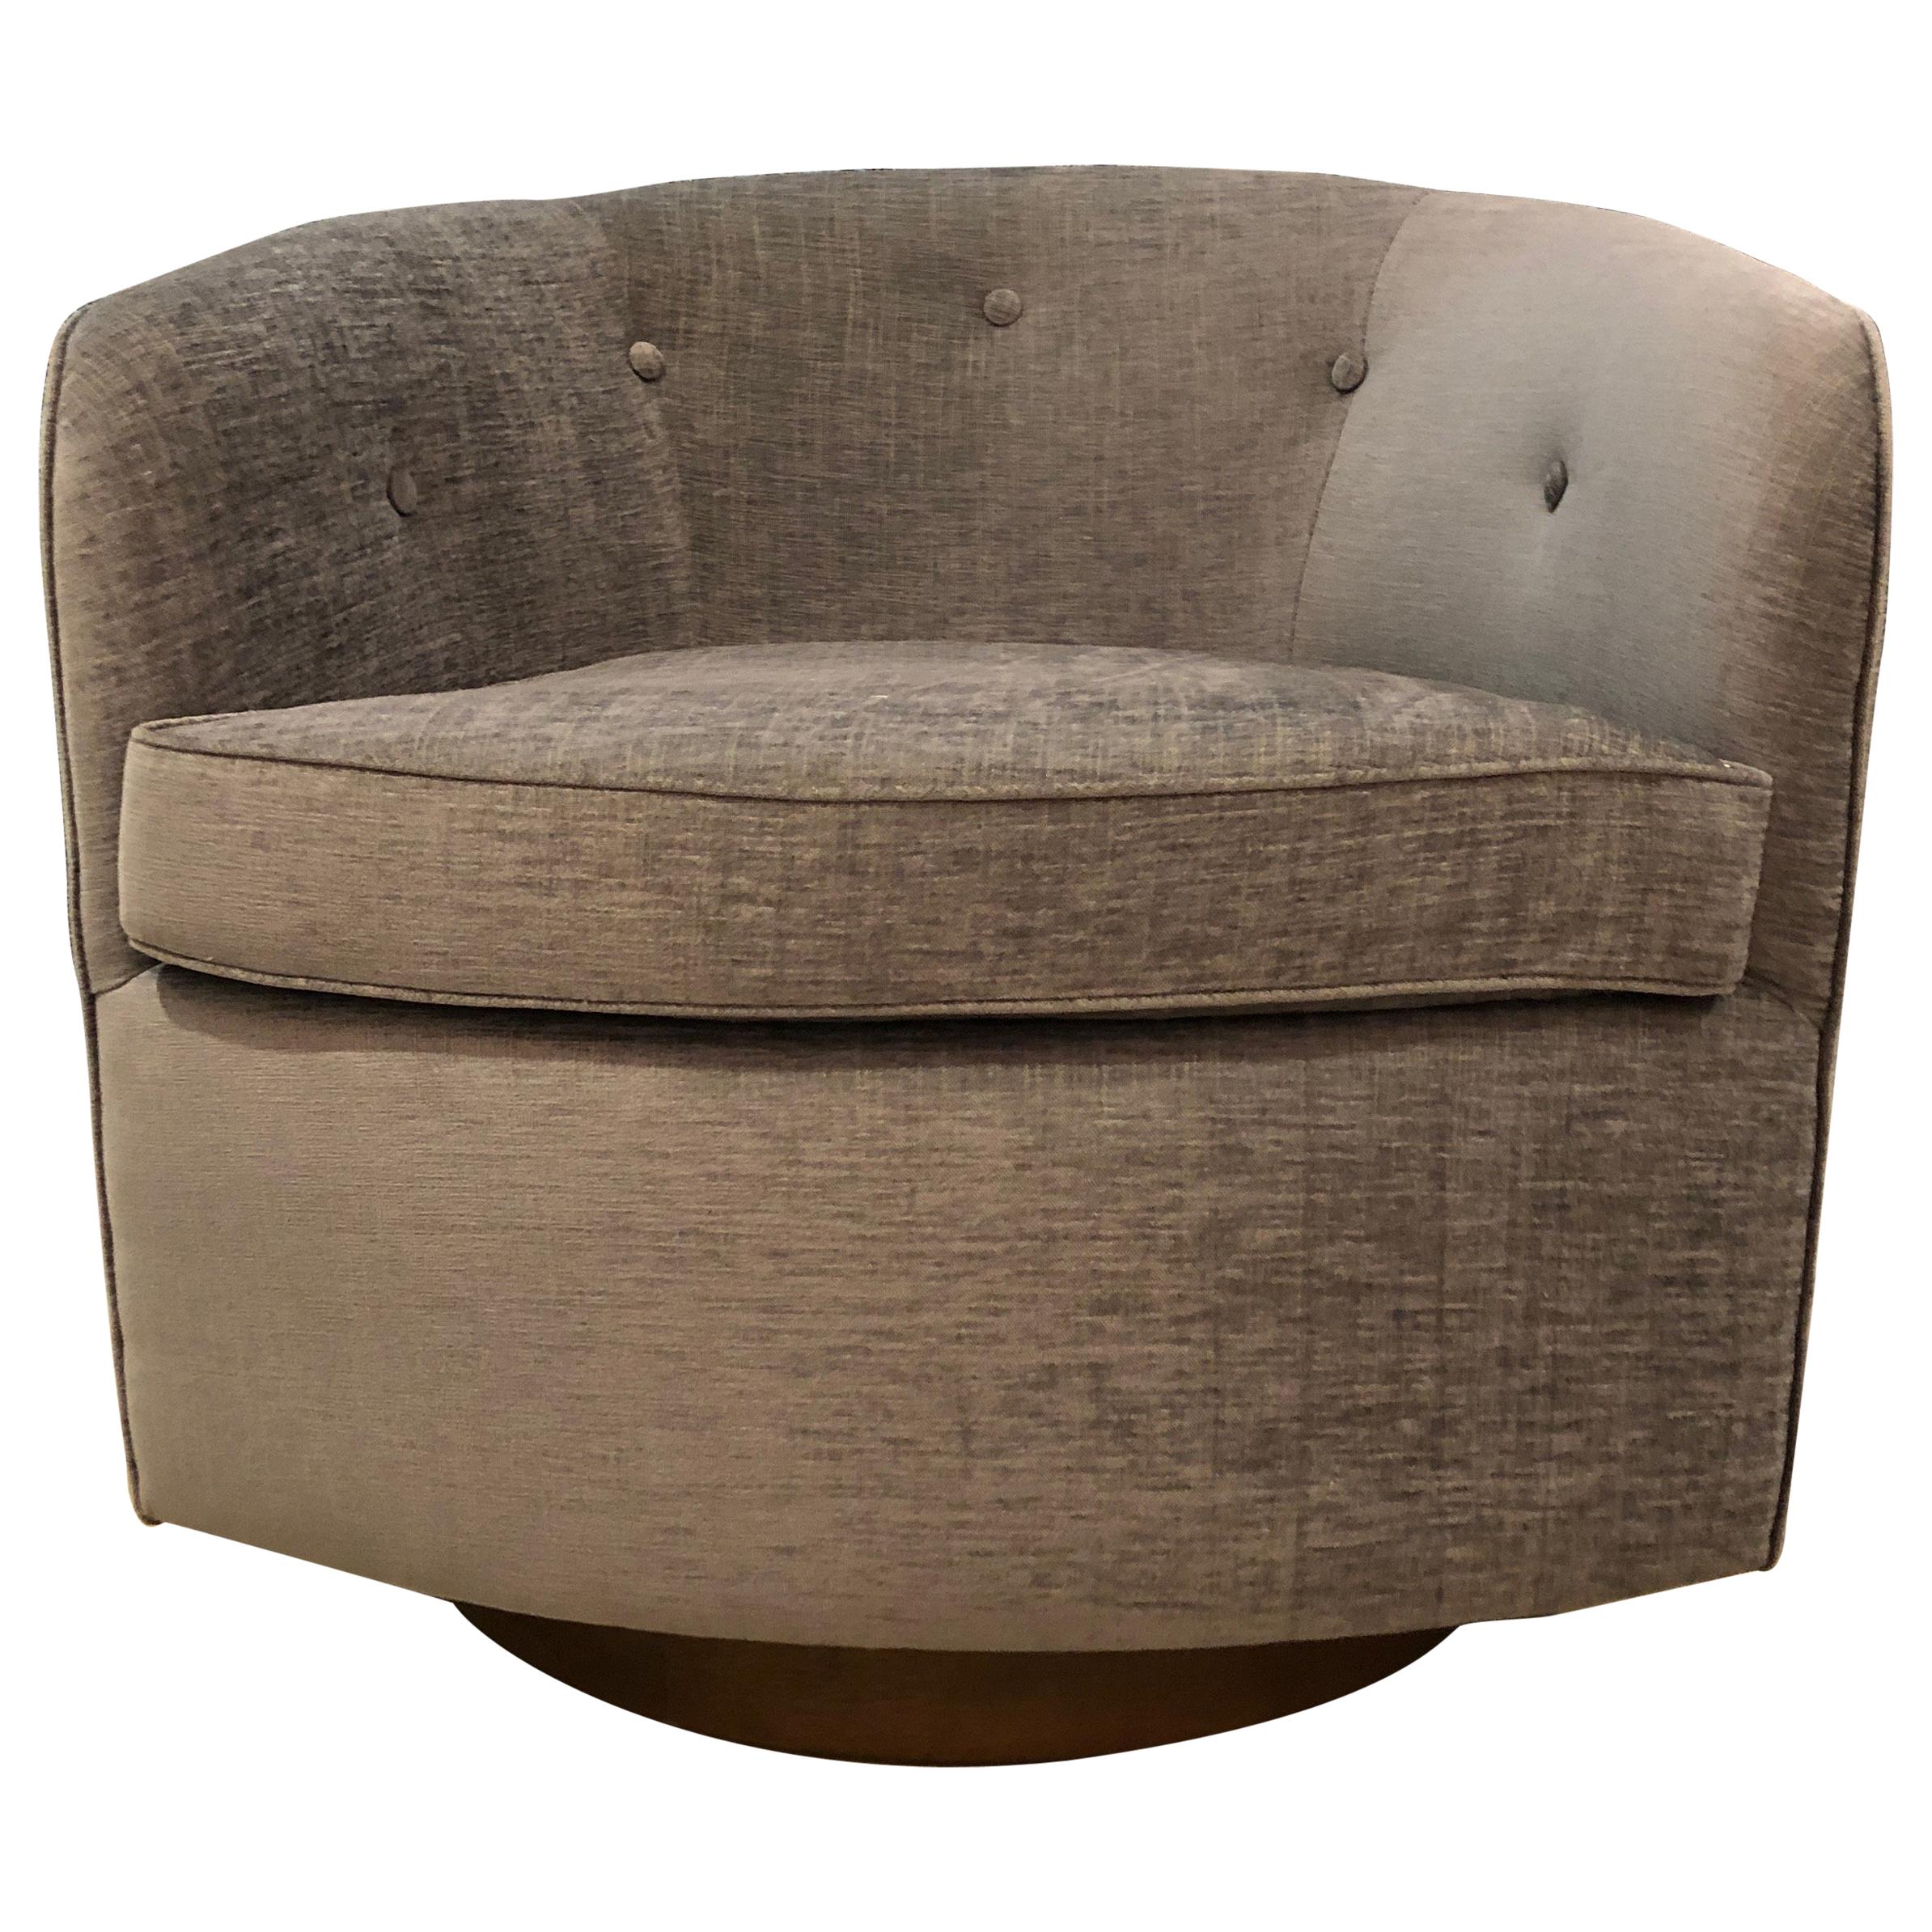 Pair of button backed lounge chairs shown in Saroma Plains chenille fabric (bluebell) on walnut swivel base. Available as shown (in stock) or available COM. Each chair requires 6 yards of fabric.